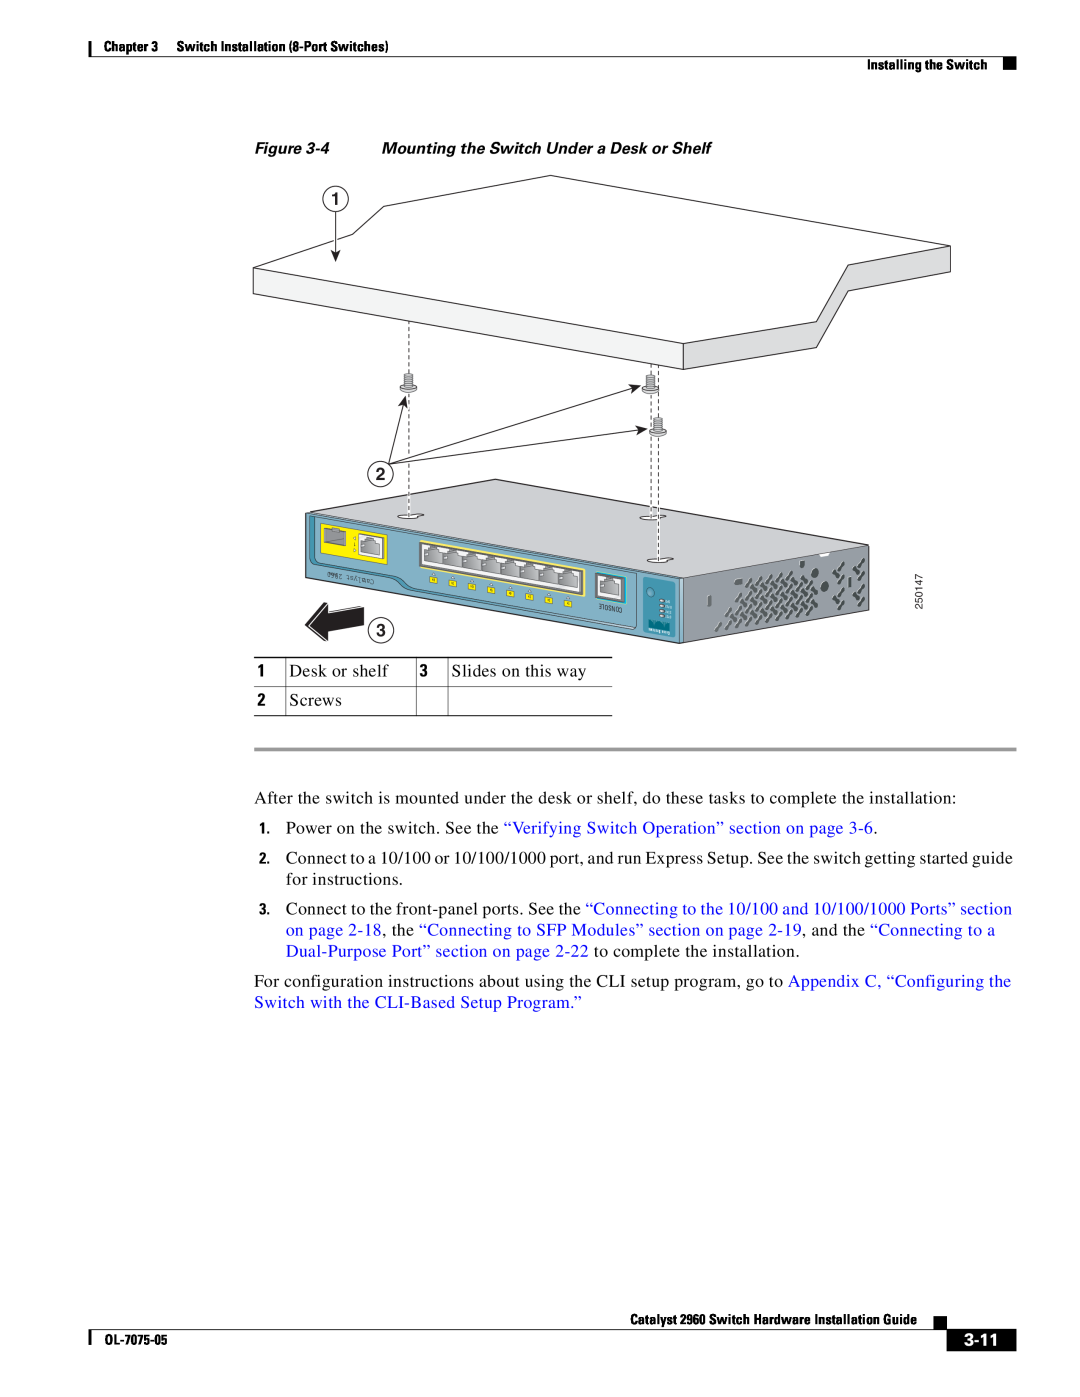 Cisco Systems 2960 specifications 3-11, 4 Mounting the Switch Under a Desk or Shelf, Console 